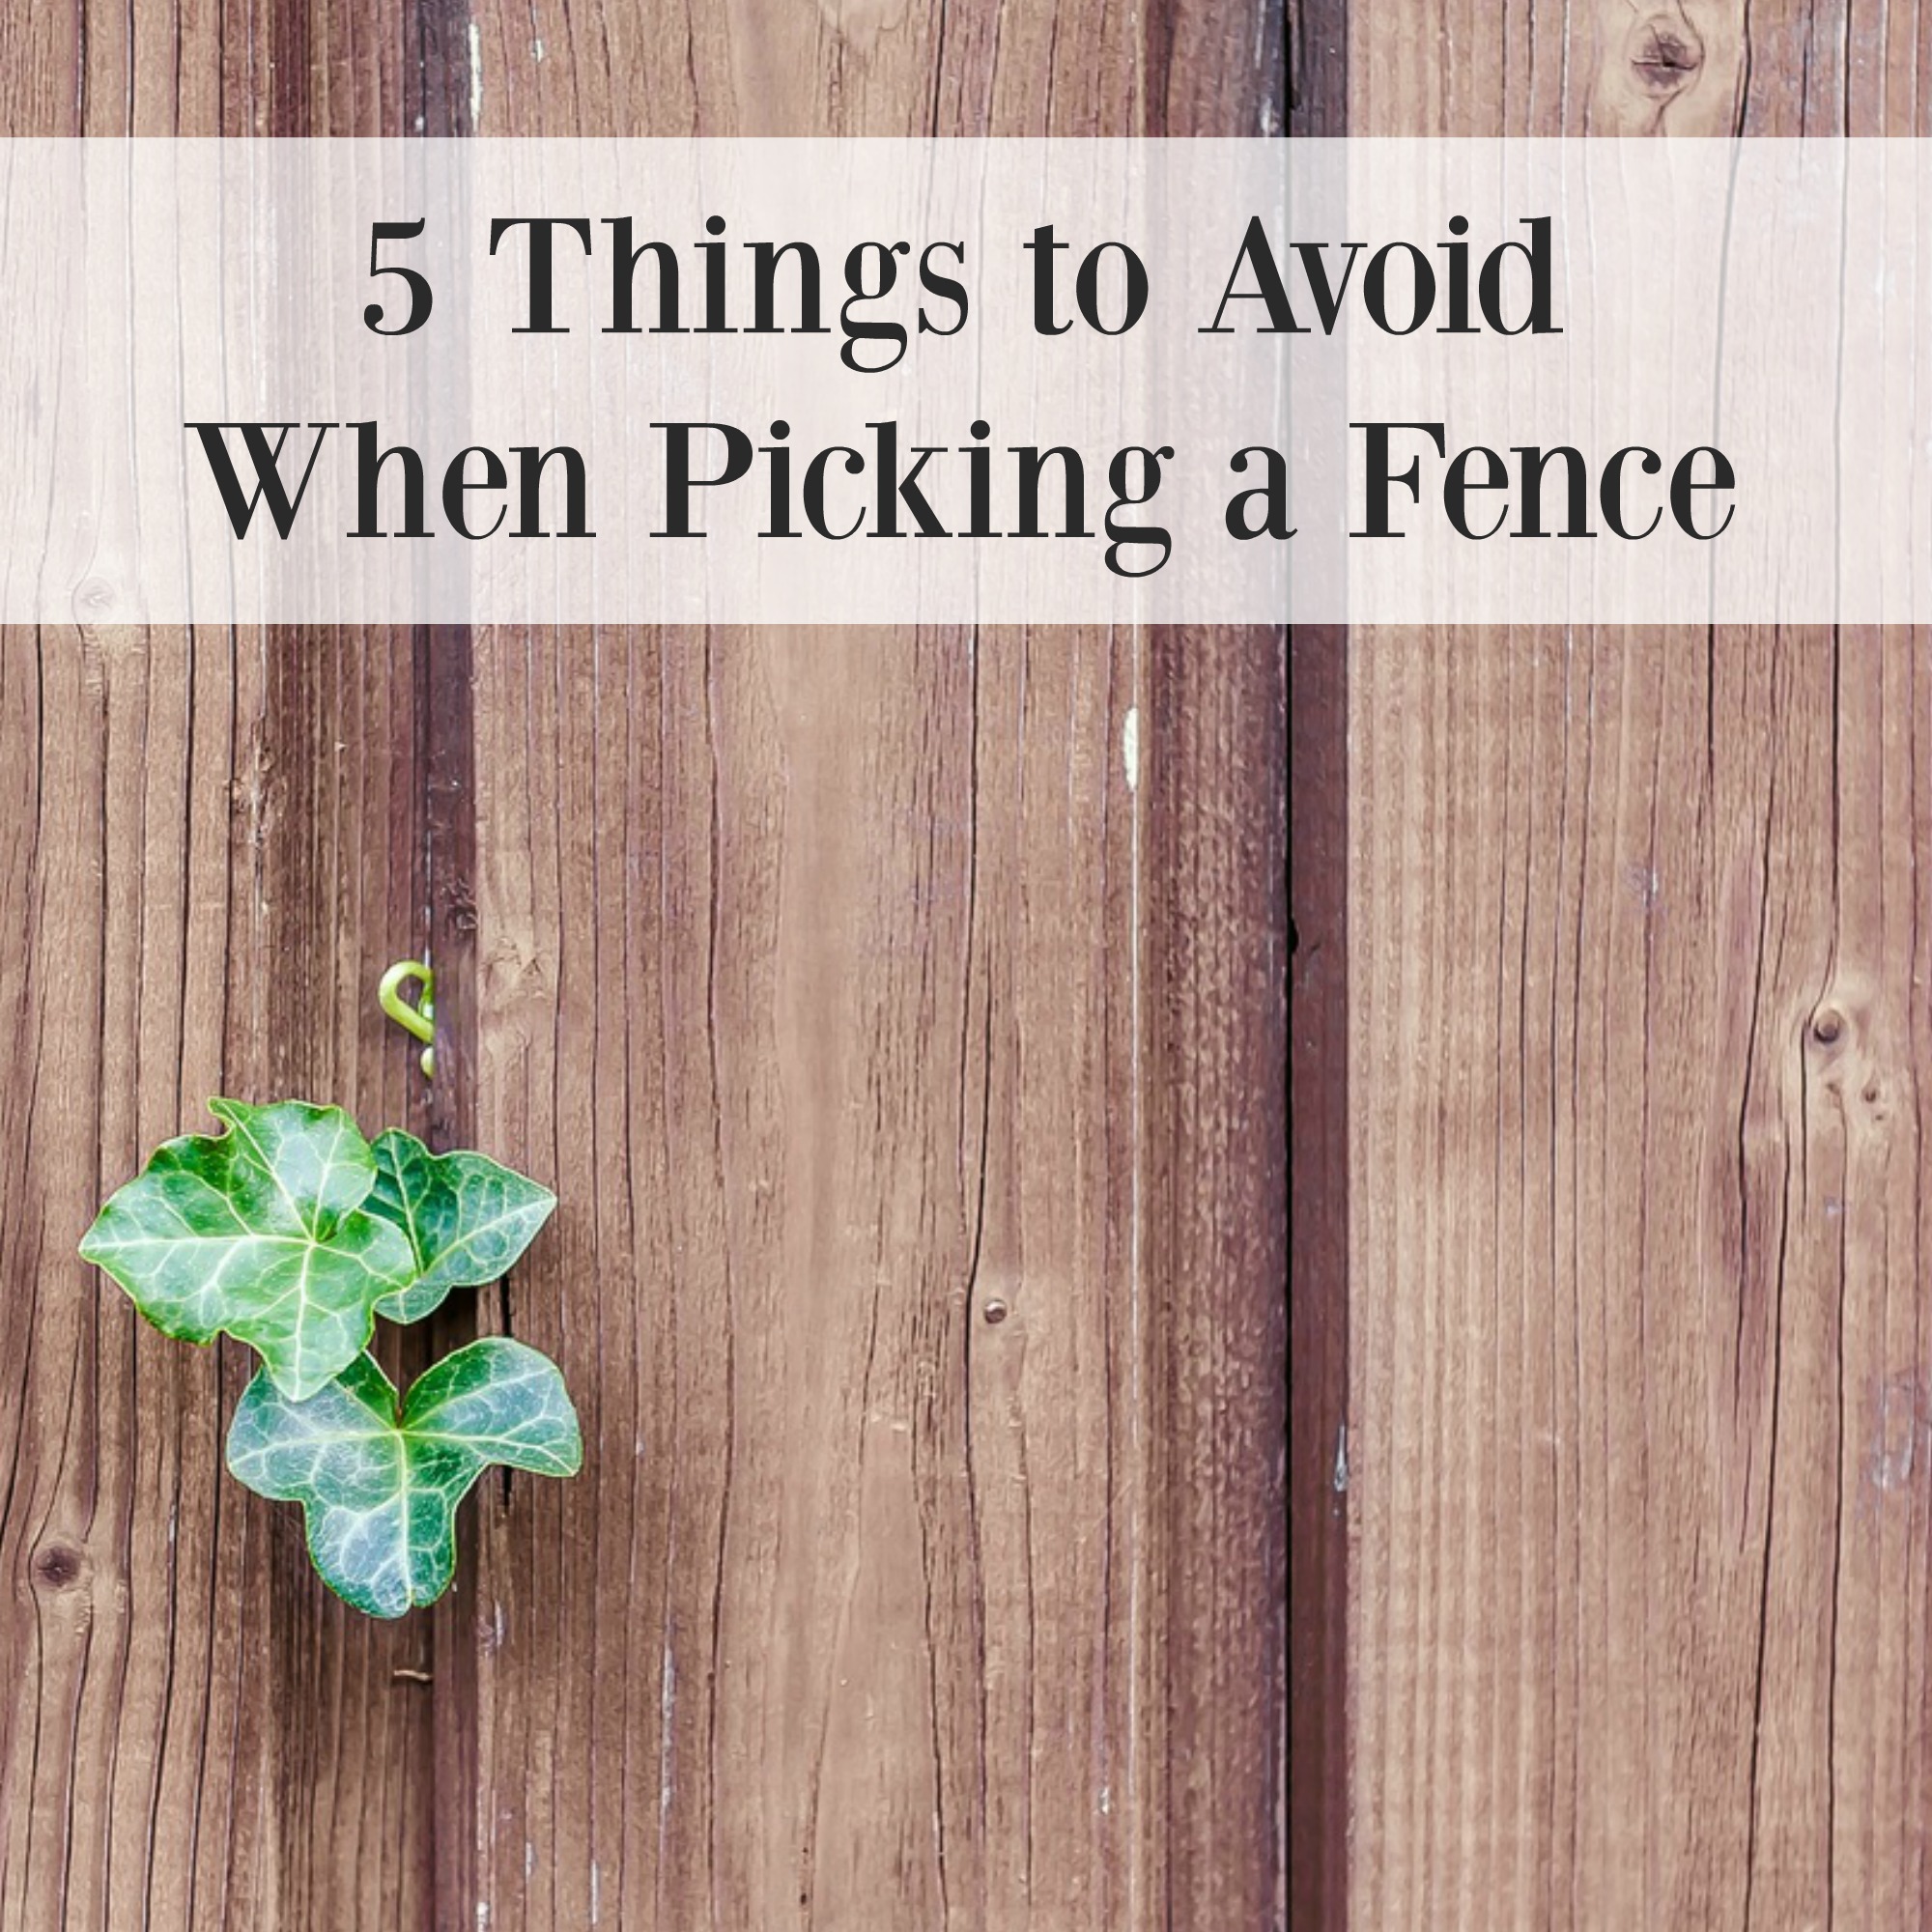 5 Things to Avoid When Picking a Fence